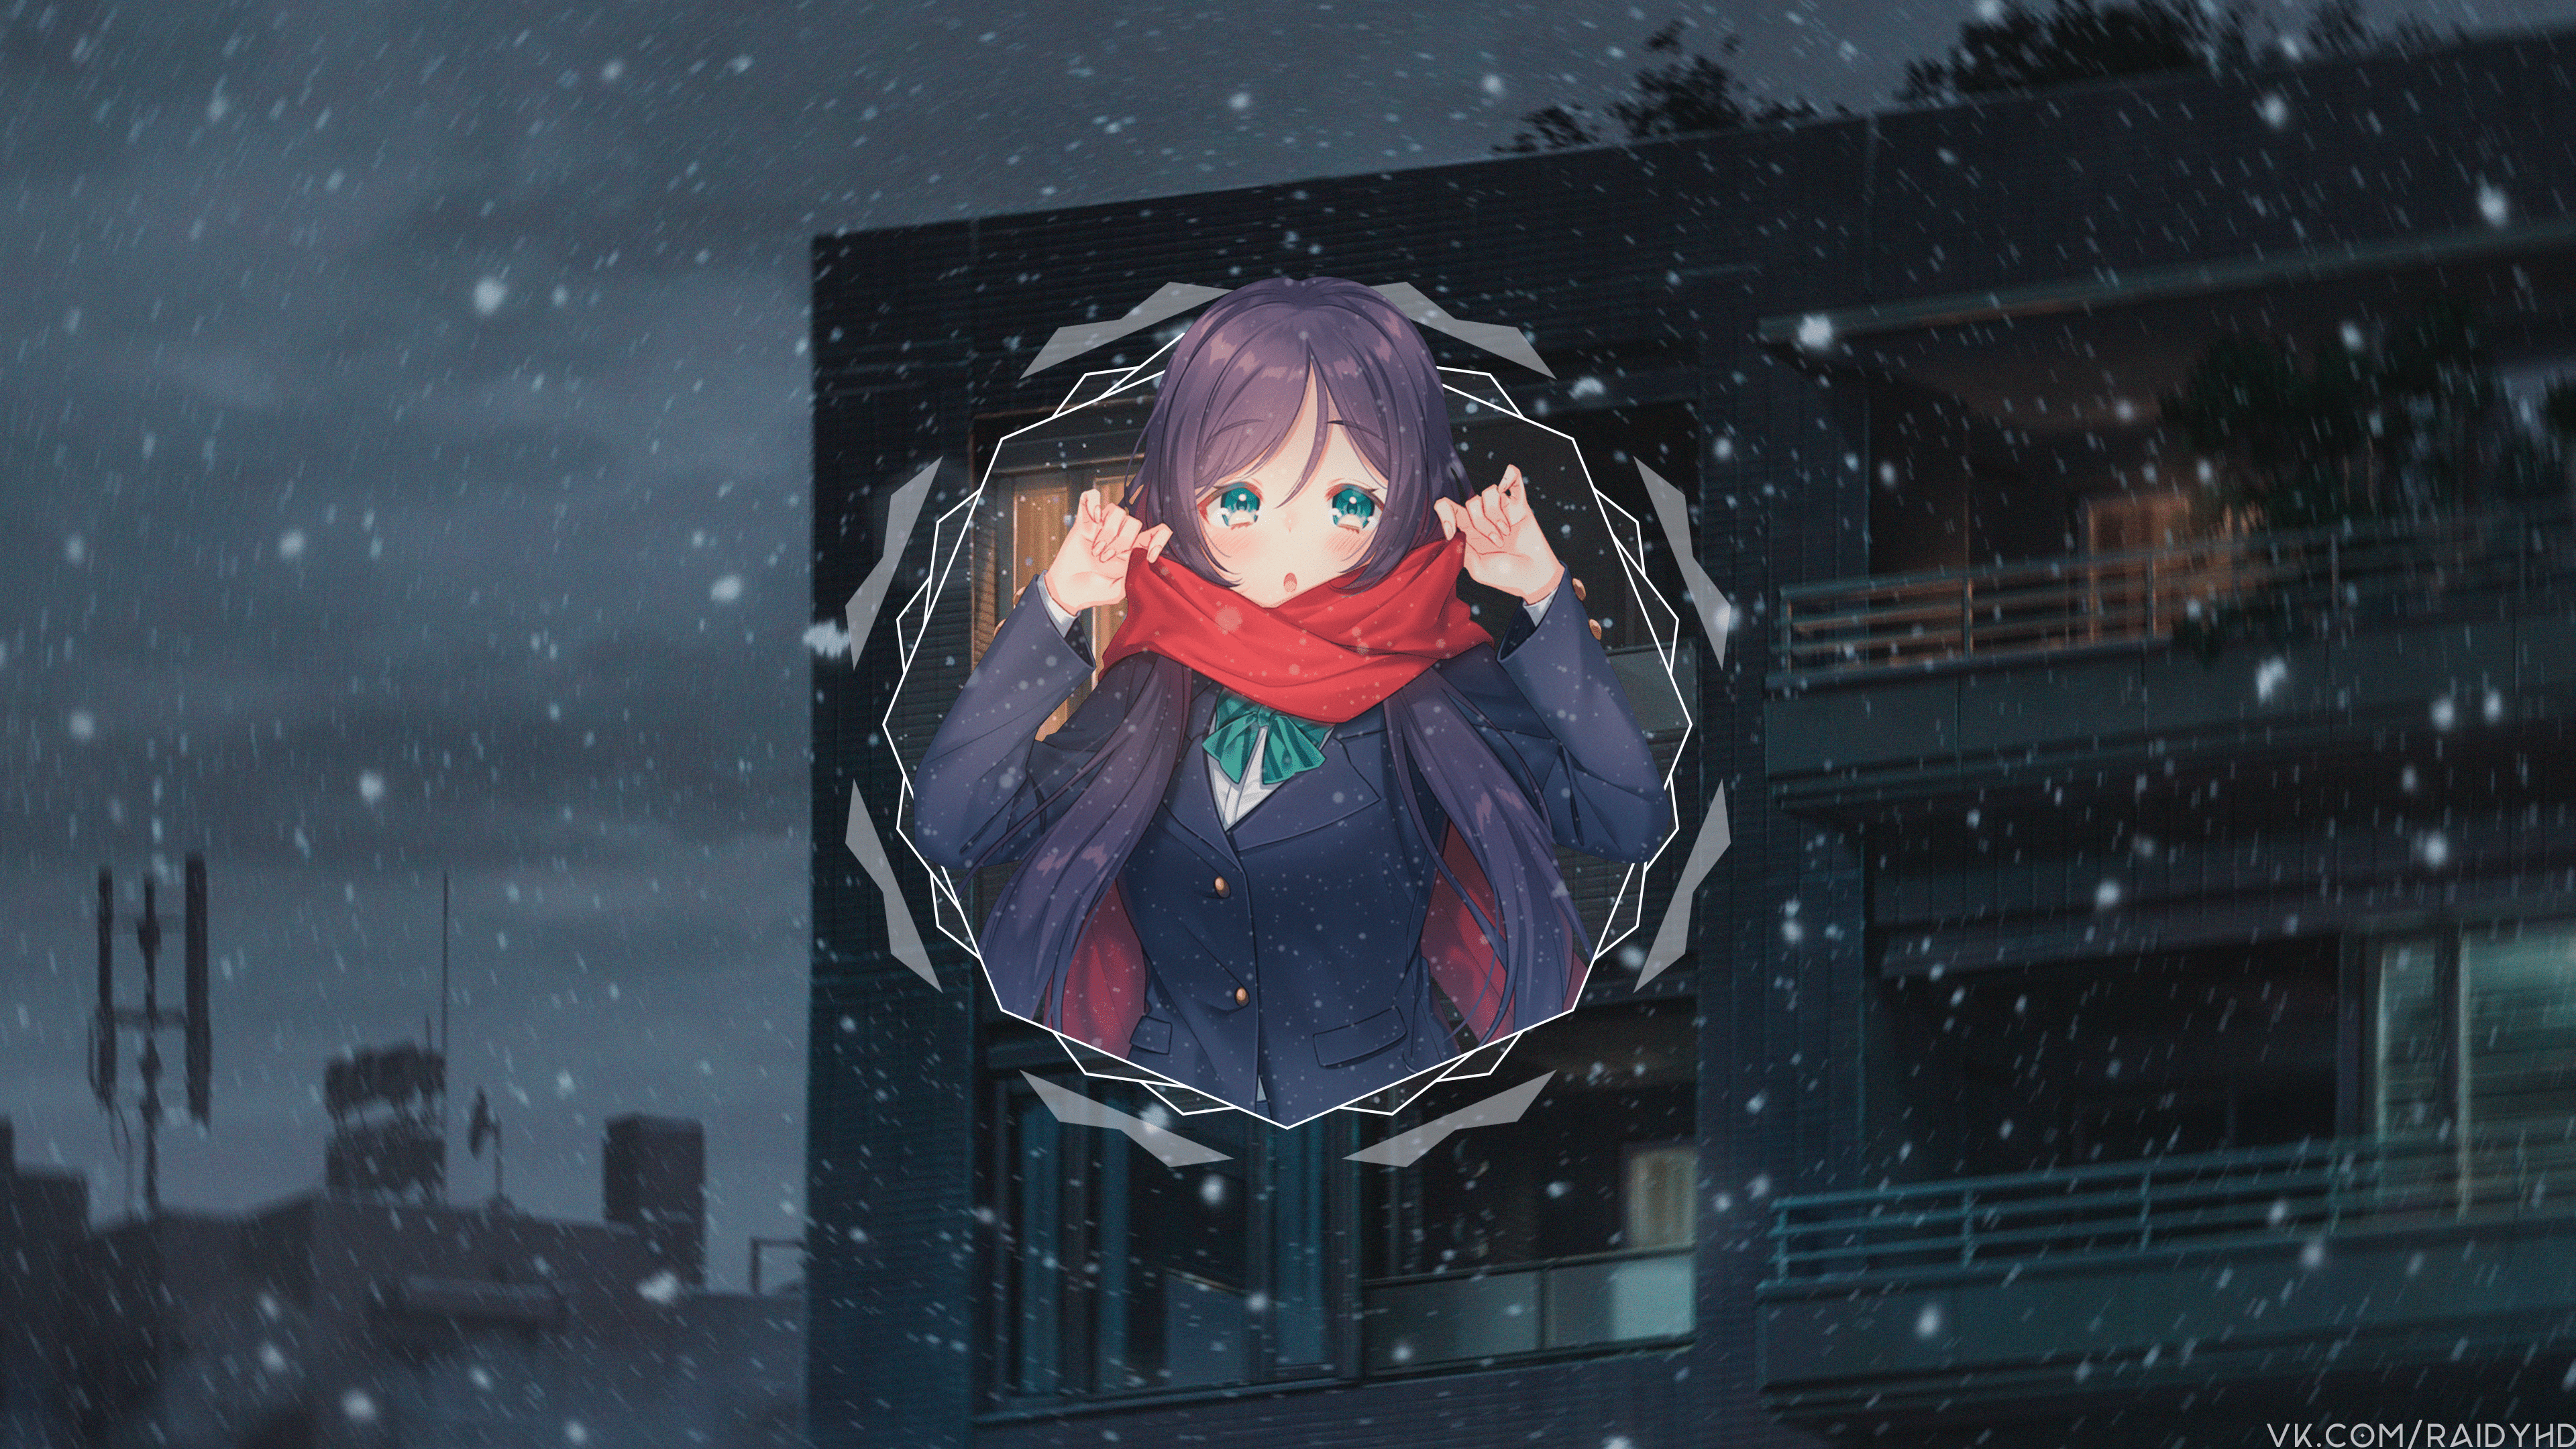 Anime 3840x2160 anime anime girls picture-in-picture Love Live! cold snow Toujou Nozomi watermarked